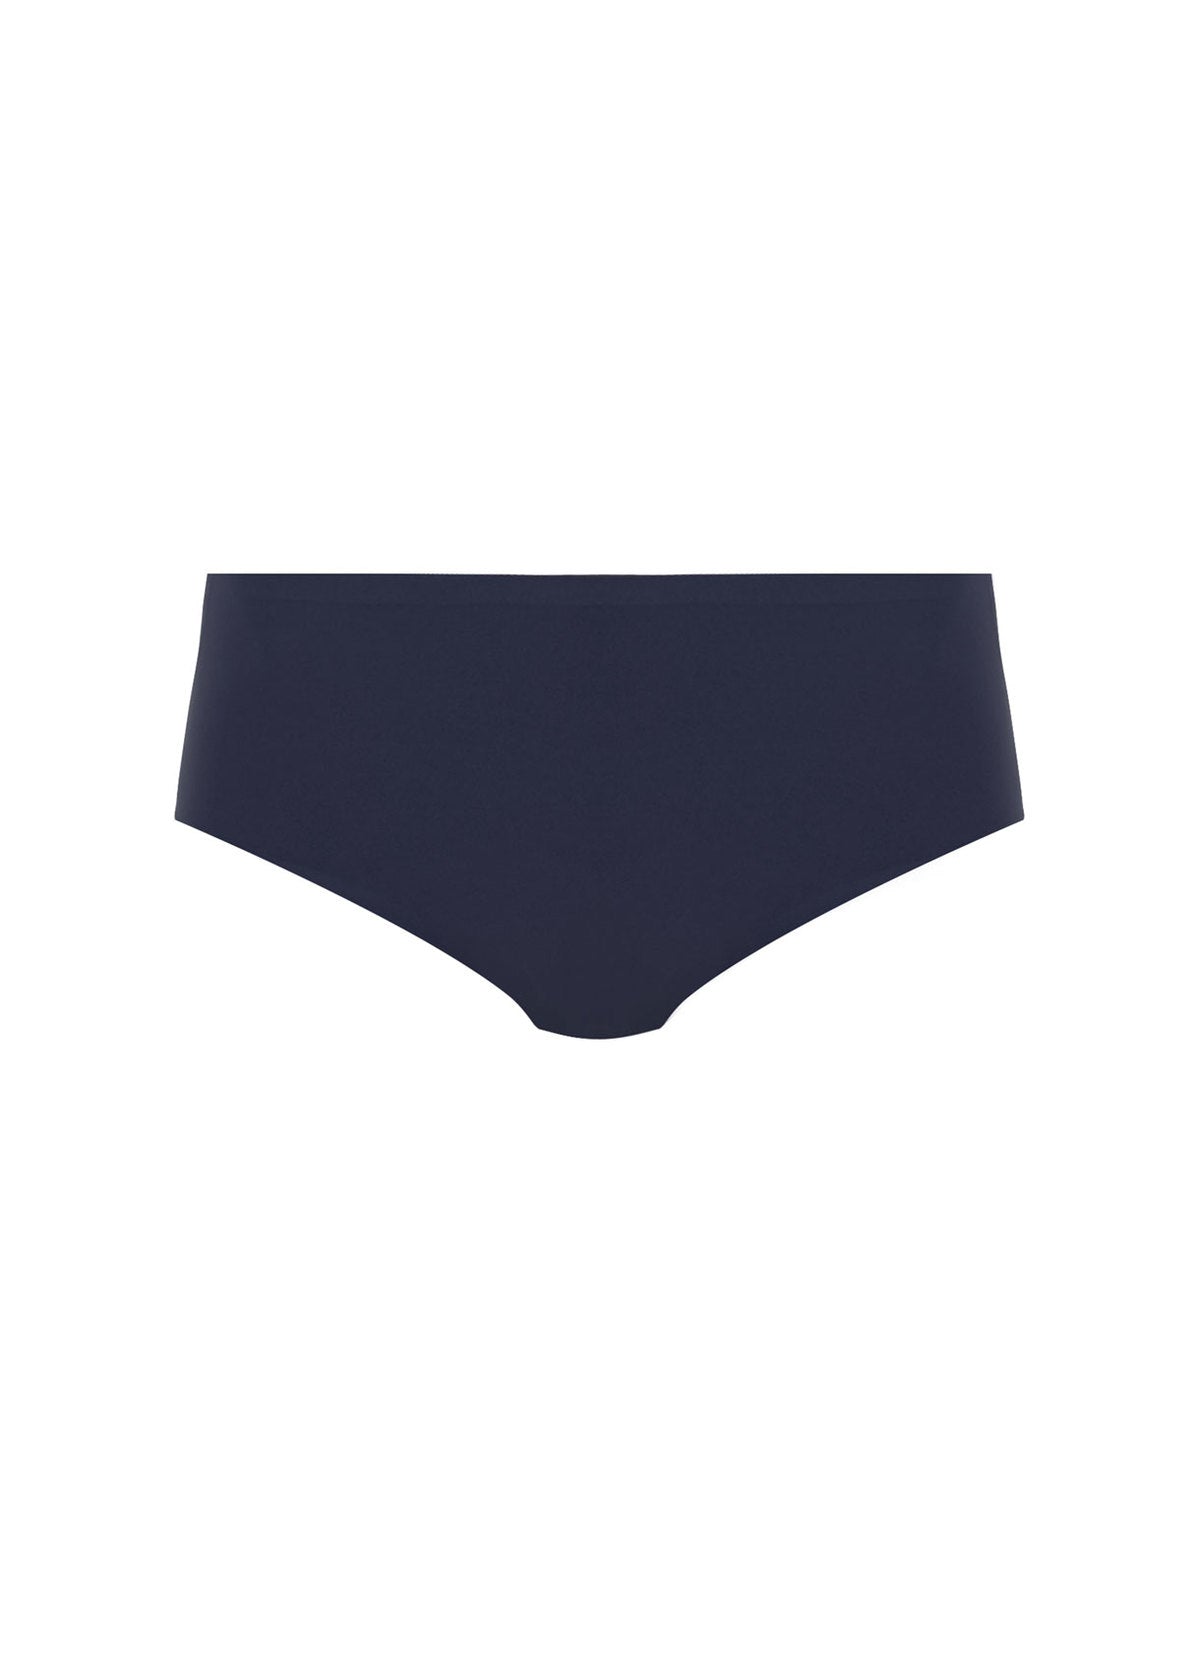 Smoothease Mid Brief One Size in Navy front view product image